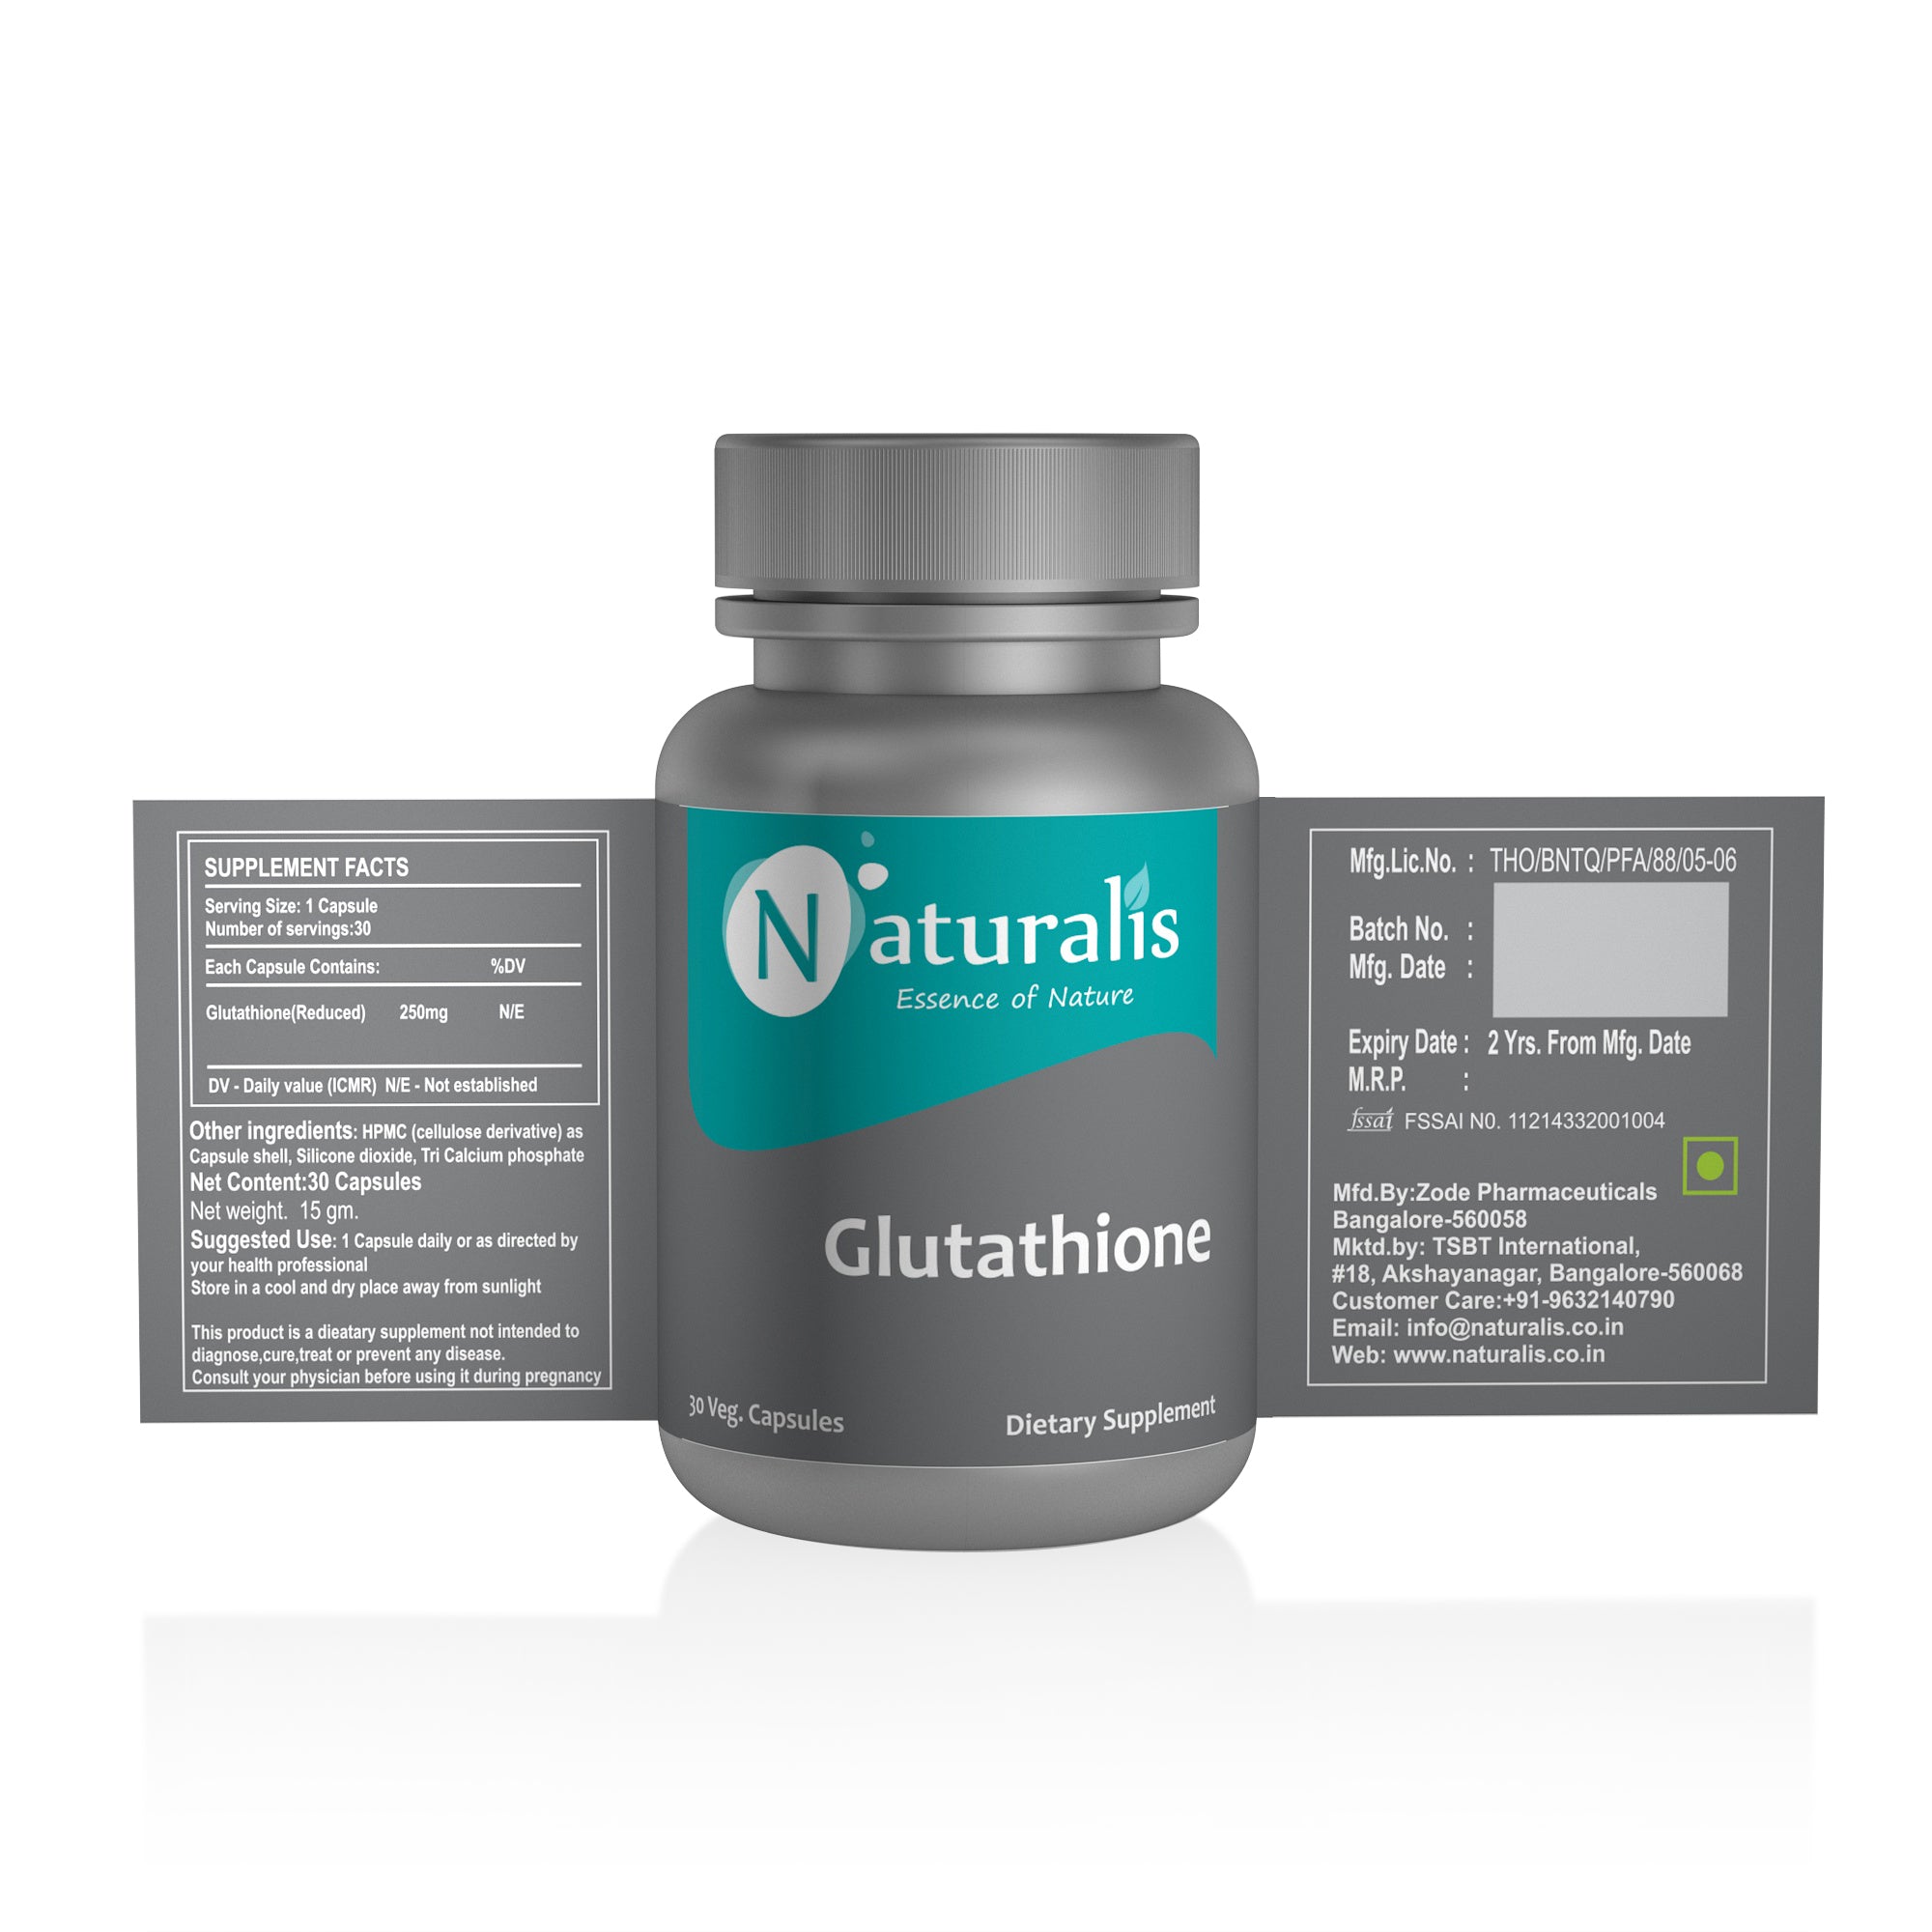 Naturalis Essence of Nature Glutathione 250mg (For Skin and Antioxidant support) – 30 Veg capsules - Naturalis